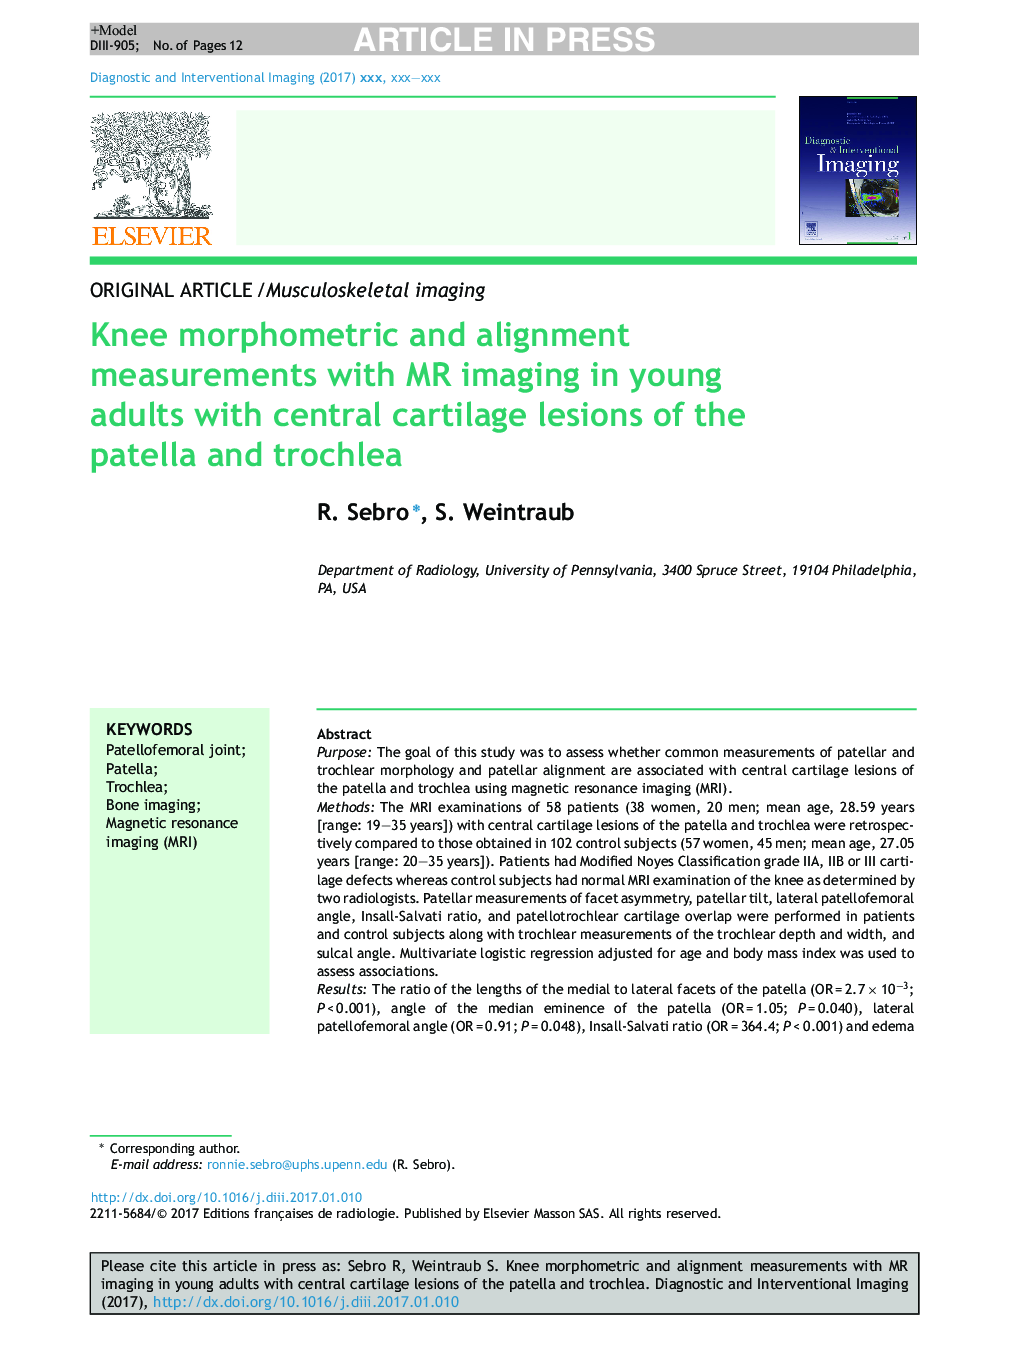 Knee morphometric and alignment measurements with MR imaging in young adults with central cartilage lesions of the patella and trochlea